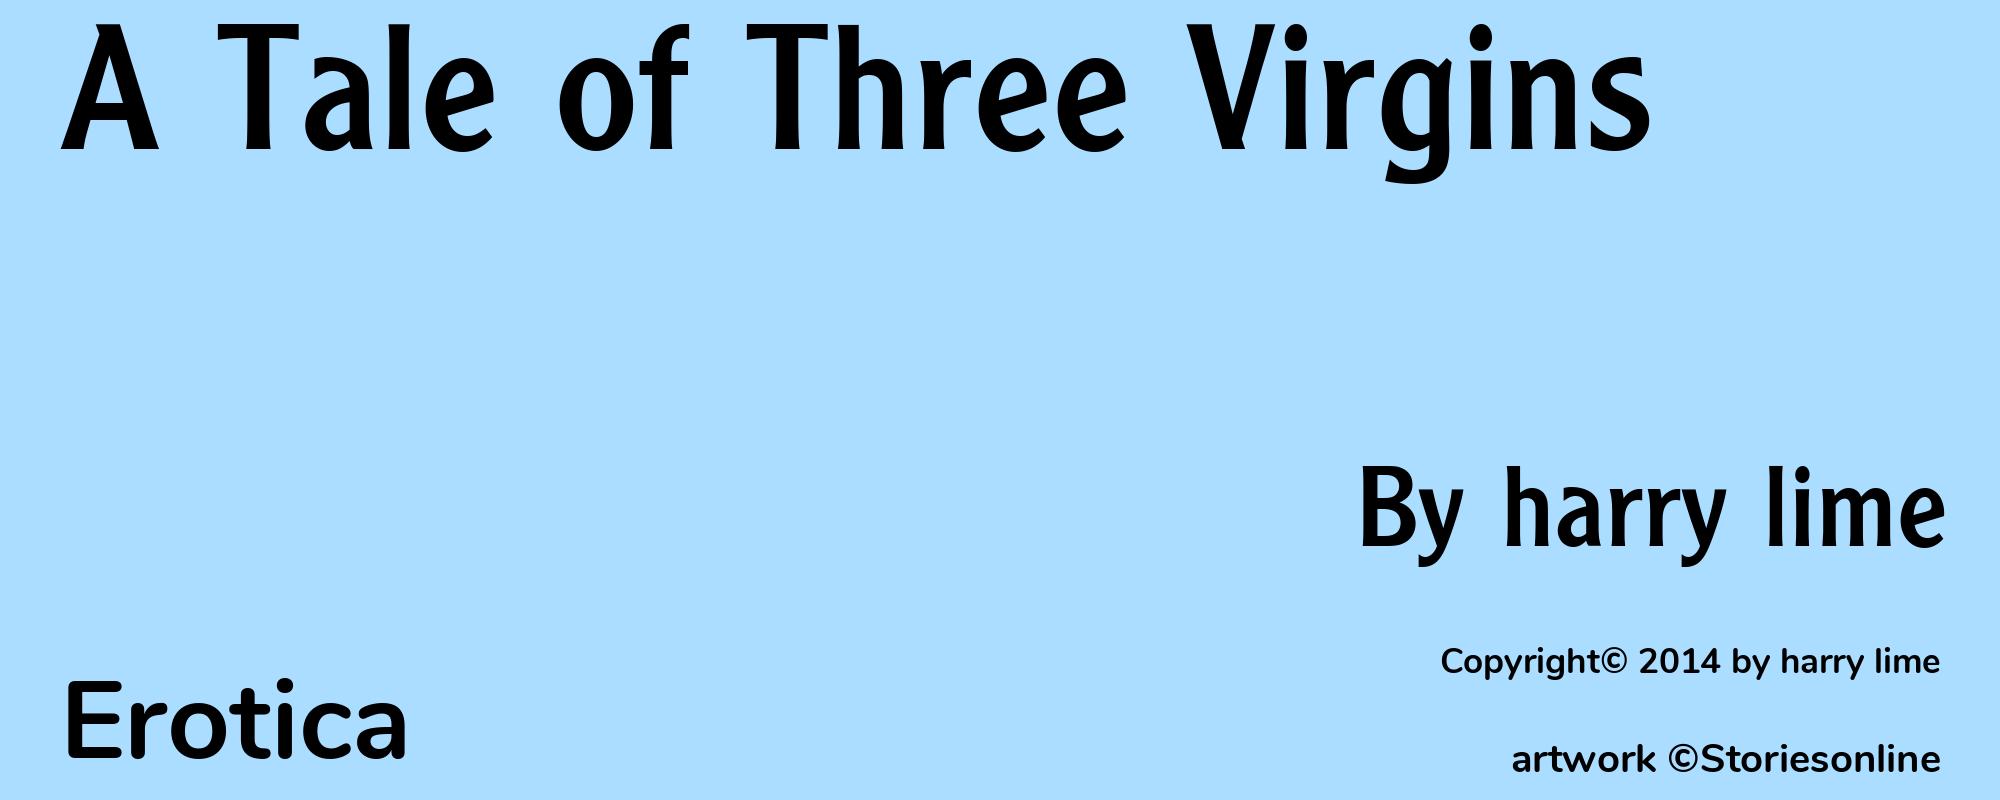 A Tale of Three Virgins - Cover